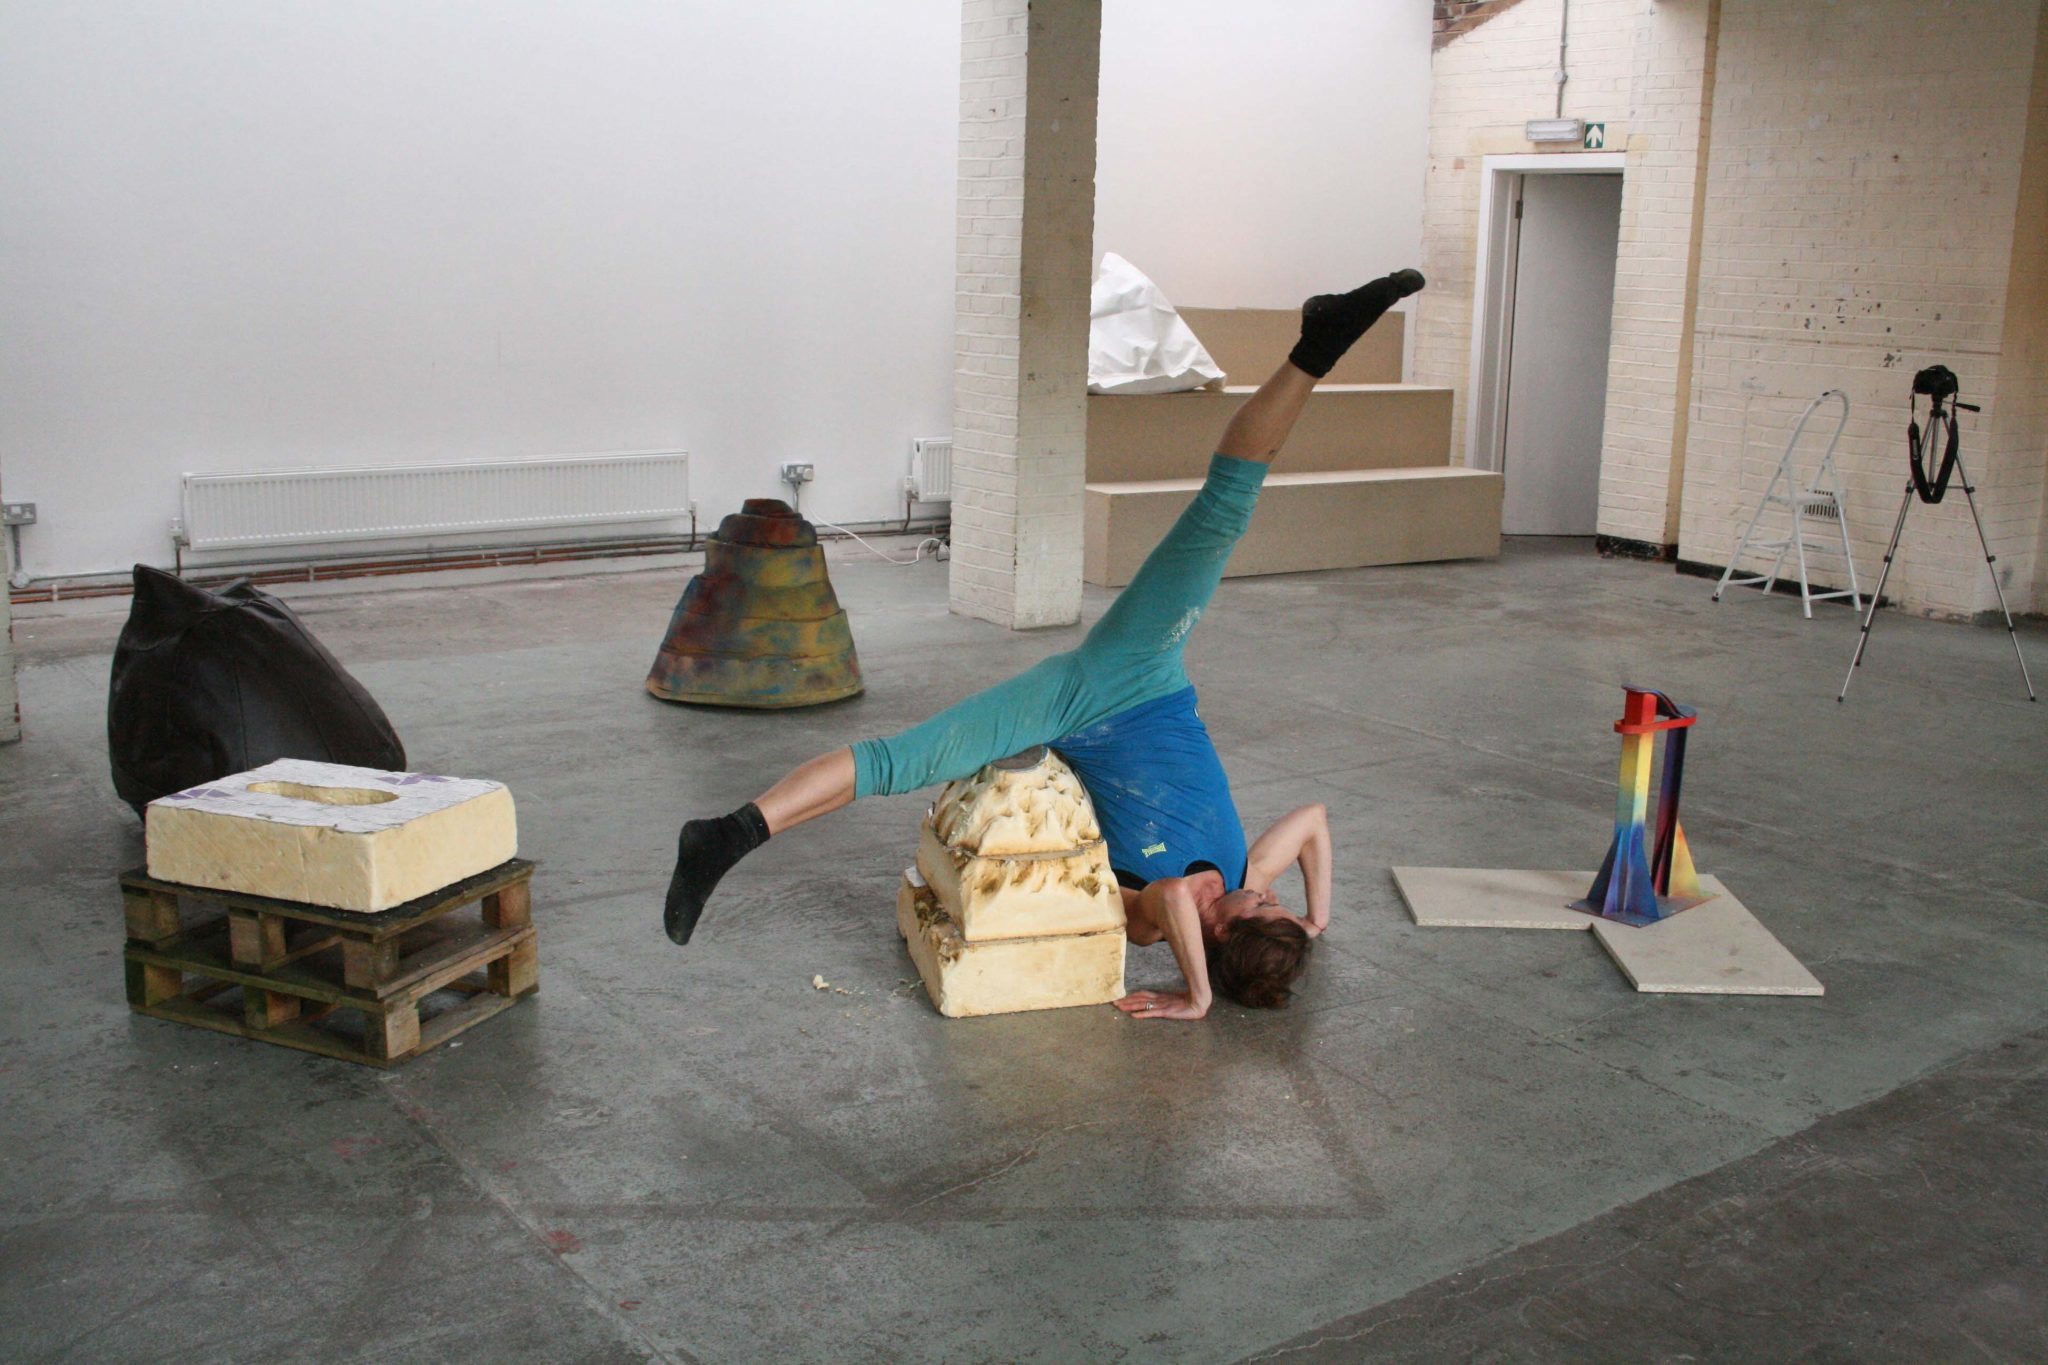 ‘Playful Menace Dance & Sculpture R&D rehearsal with dancer Abigail Kessel’ 2015 – photo – Guest Projects/Shonibare Studios